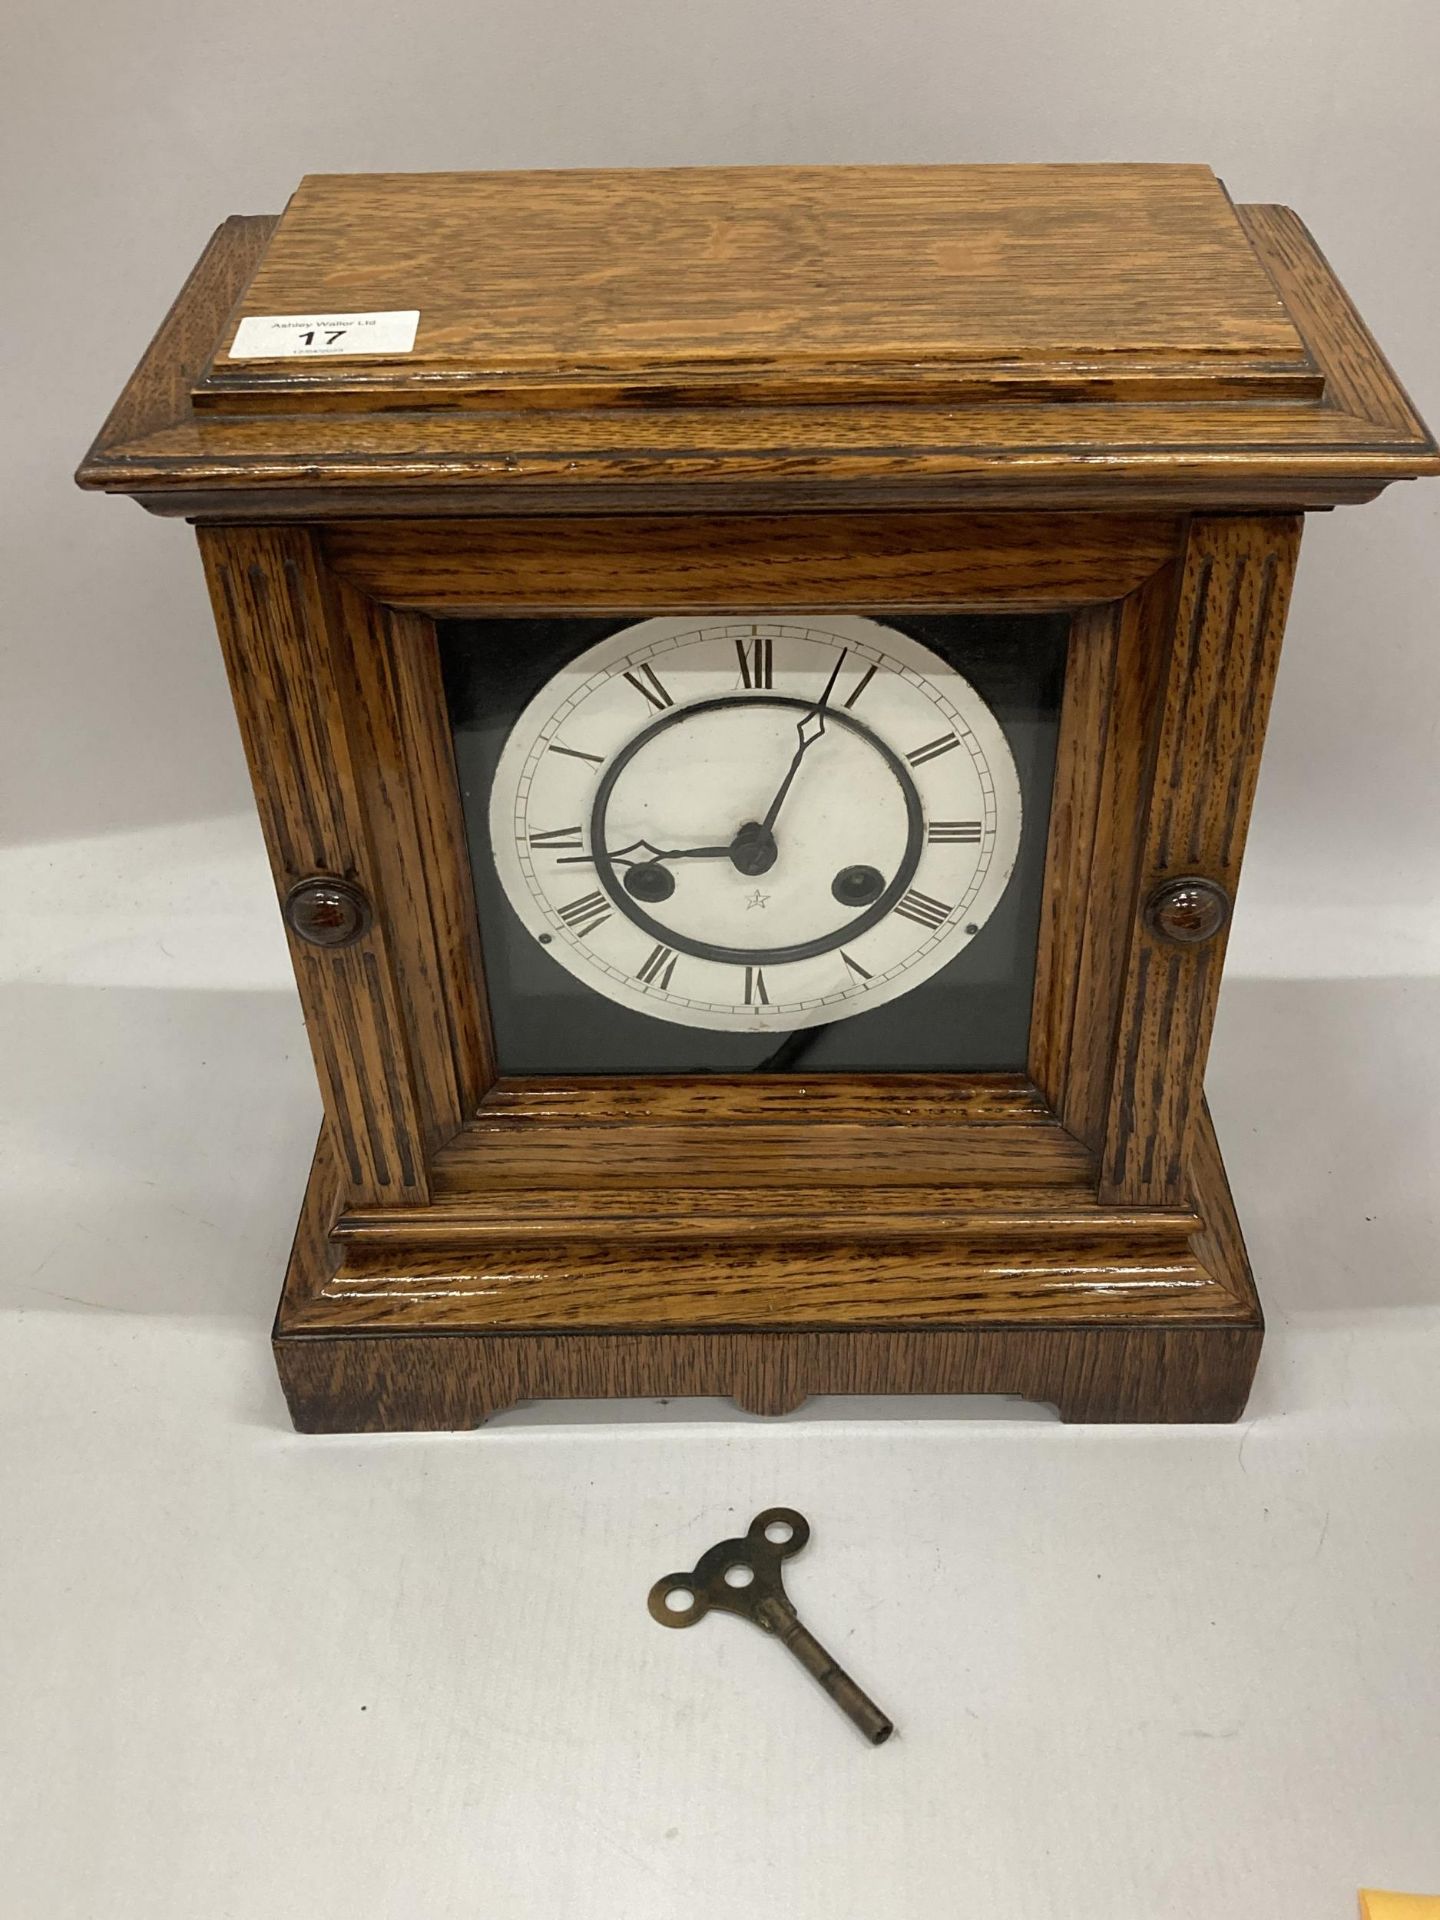 AN EARLY 20TH CENTURY JUNGHANS, GERMAN, OAK CASED CHIMING MANTLE CLOCK WITH KEY - Image 5 of 5